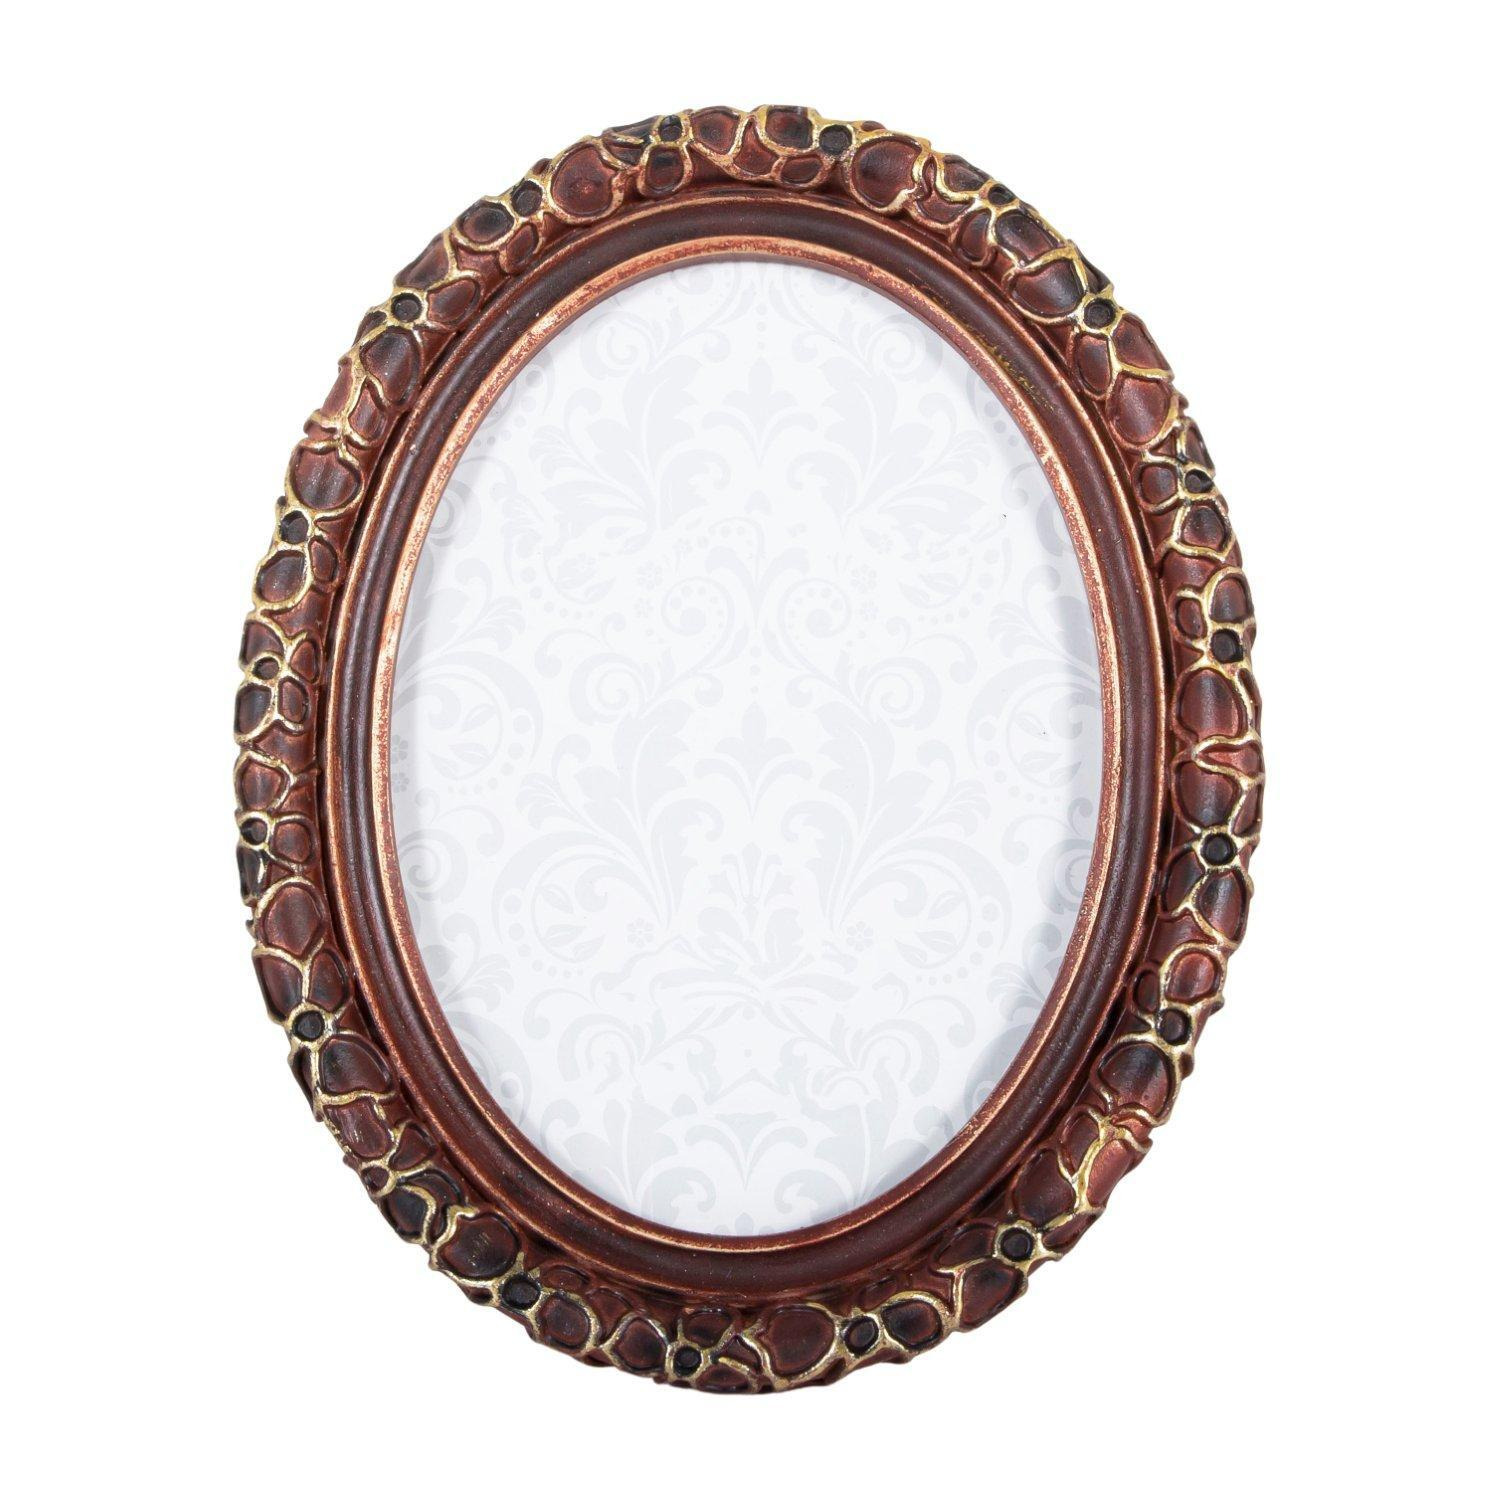 Antique and Vintage Rustic Burgundy Oval 5x7 Picture Frame for Table or Wall - image 1